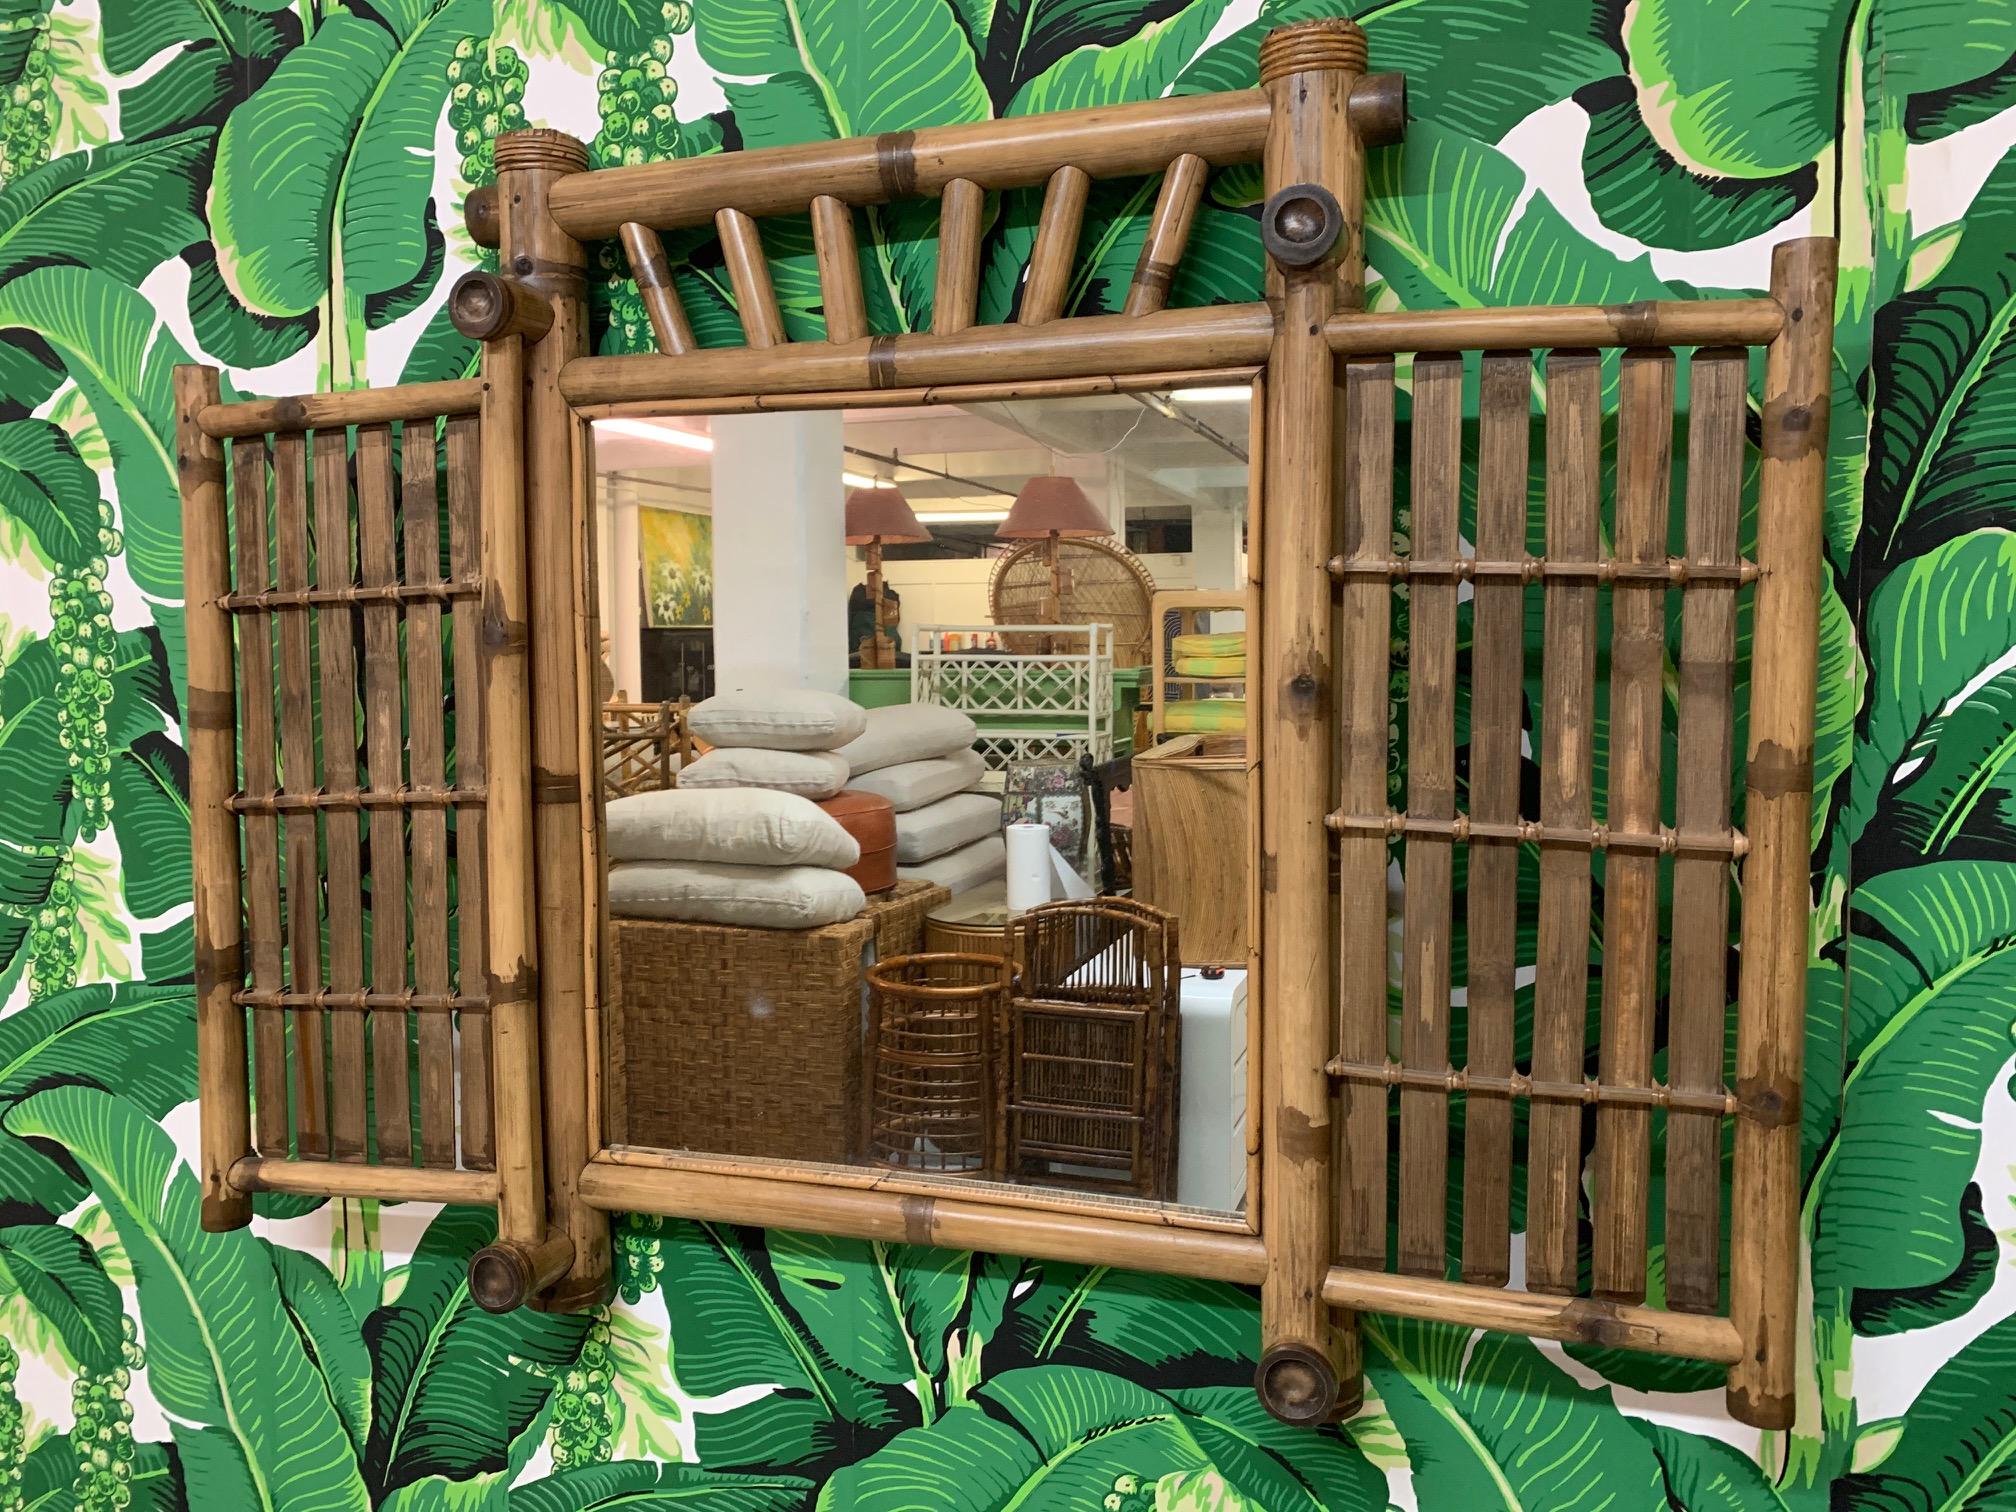 Tiki style bamboo and rattan mirror features double door sides that can swing closed to hide the mirror. Mirror can be mounted on the wall or it can stand on a dresser or desk as a vanity mirror. A perfect way to add some Polynesian island style to